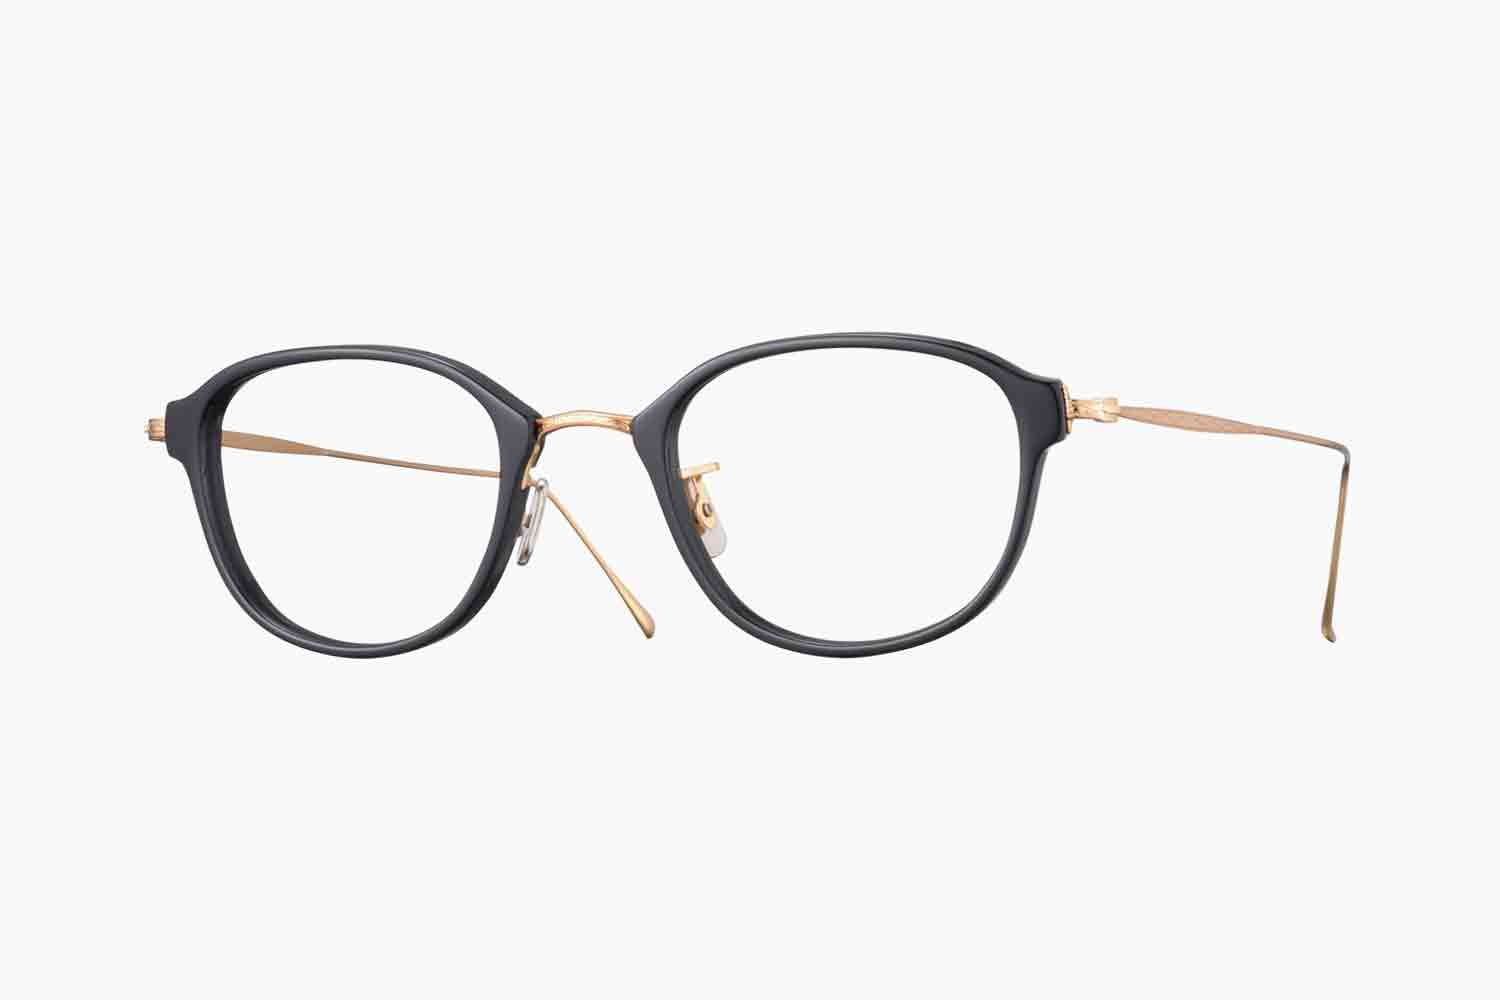 EYEVAN 7285｜8th｜555 - 1002｜PRODUCT｜Continuer Inc.｜メガネ 